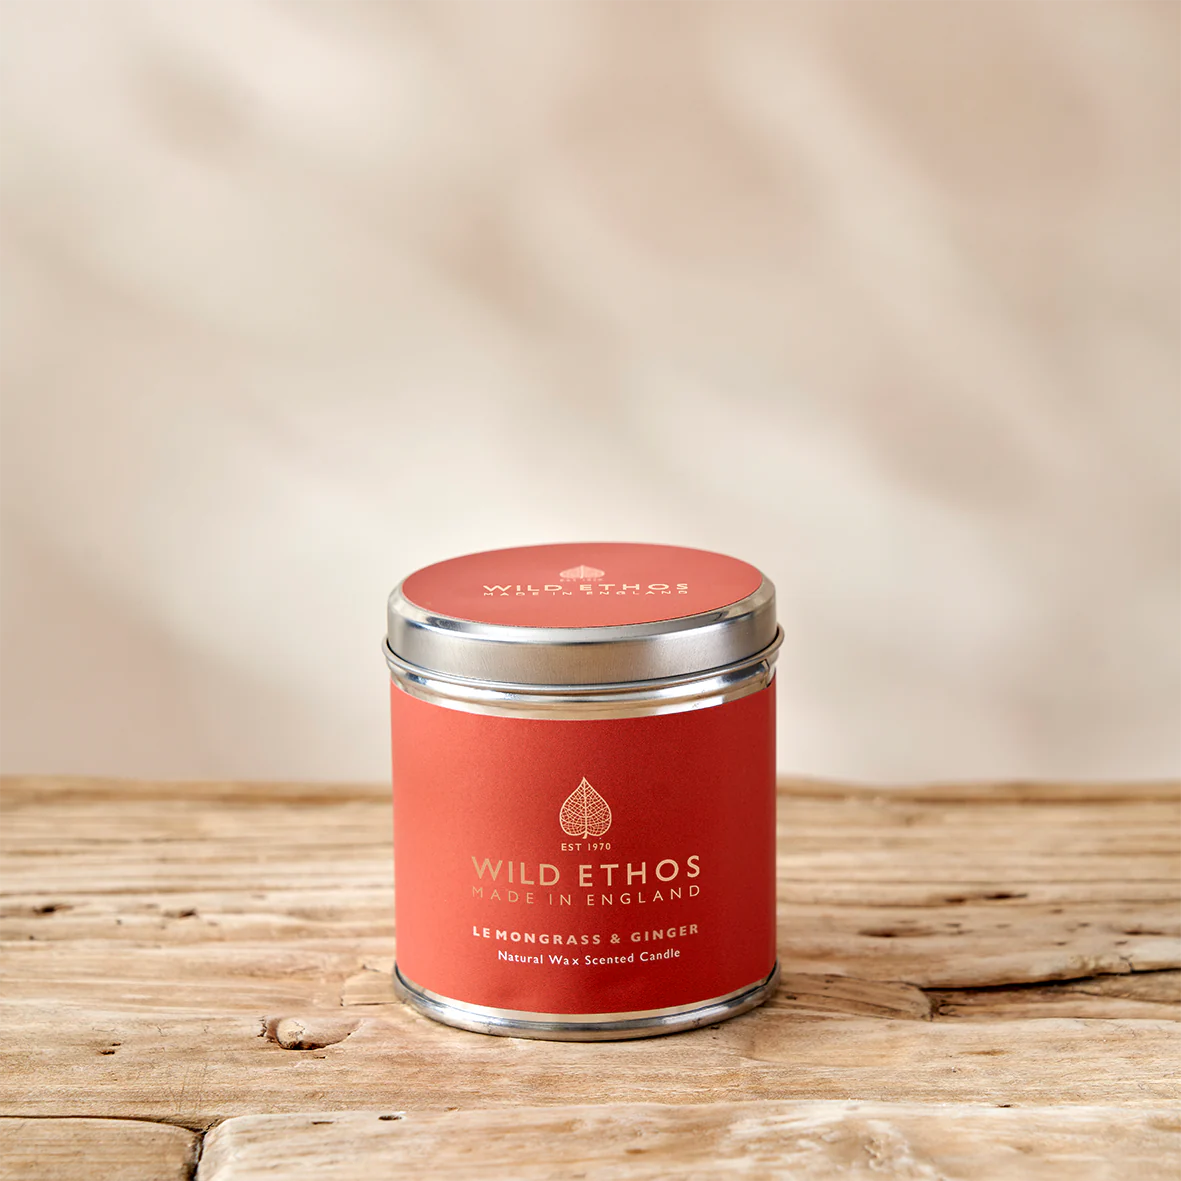 Wild Ethos Lemongrass and Ginger Tin Candle - Wooden Table